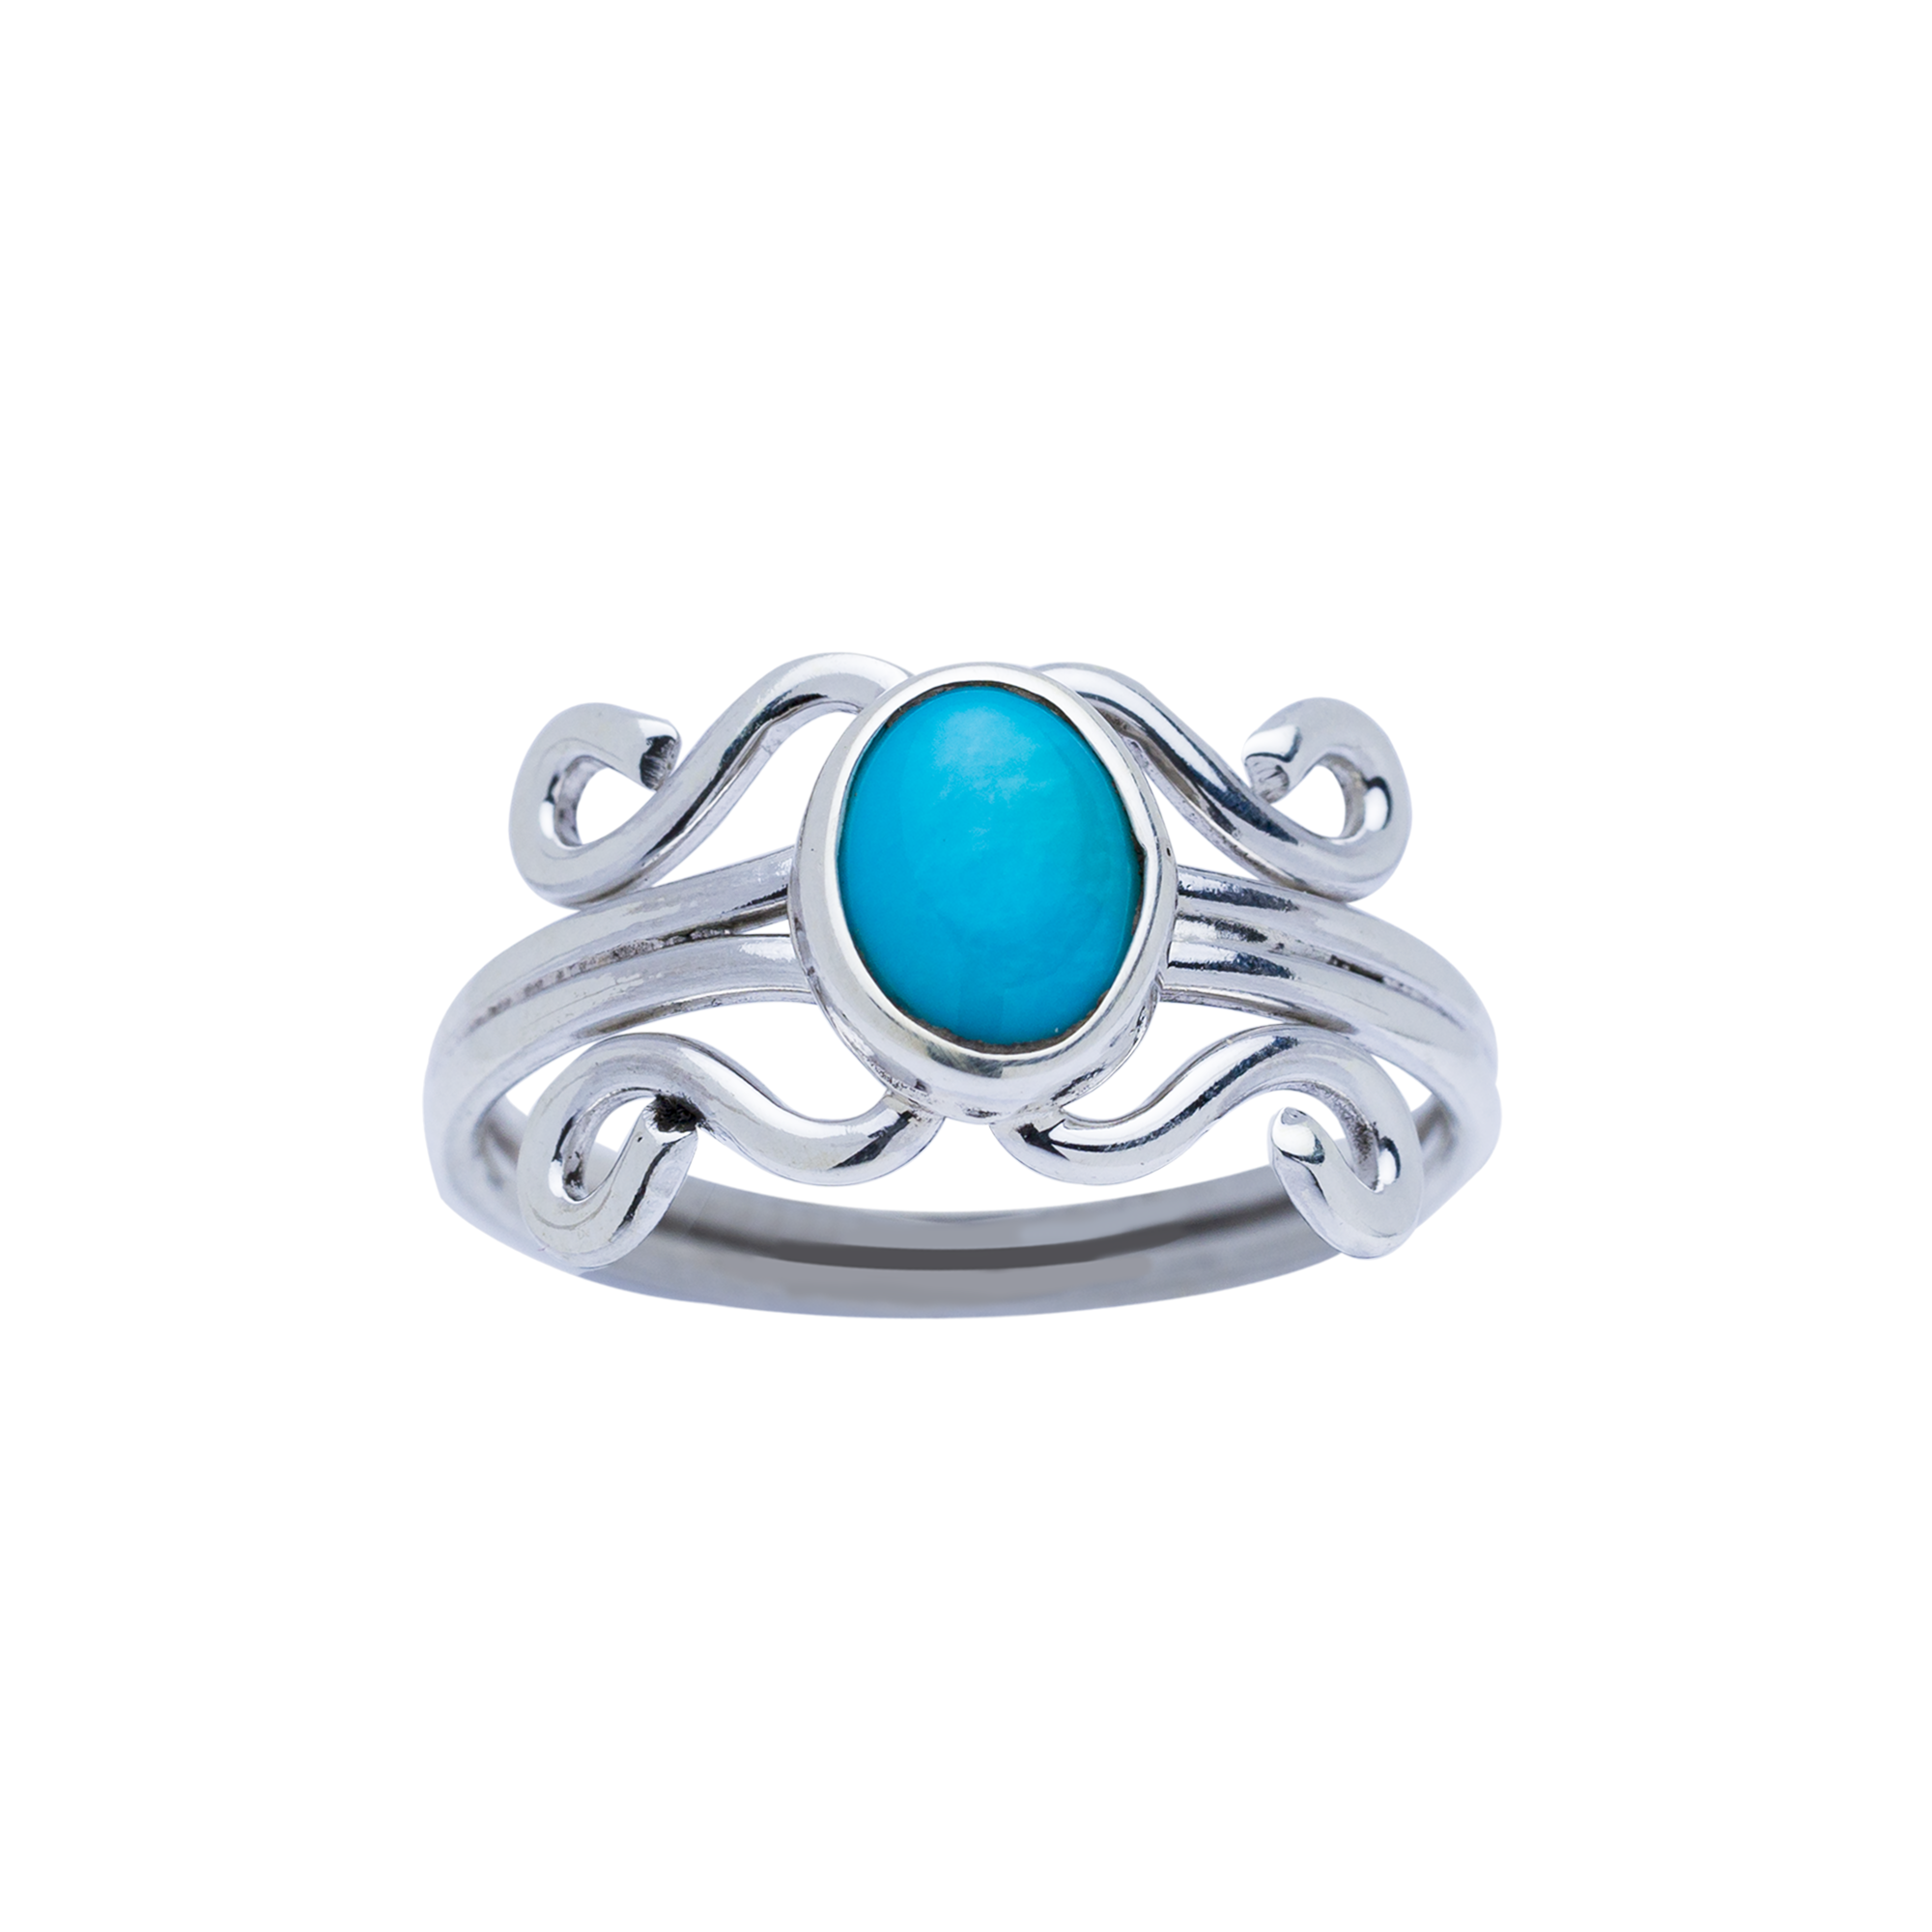 RG.FEL.1104 - Turquoise Ring, Handcrafted with Sterling Silver